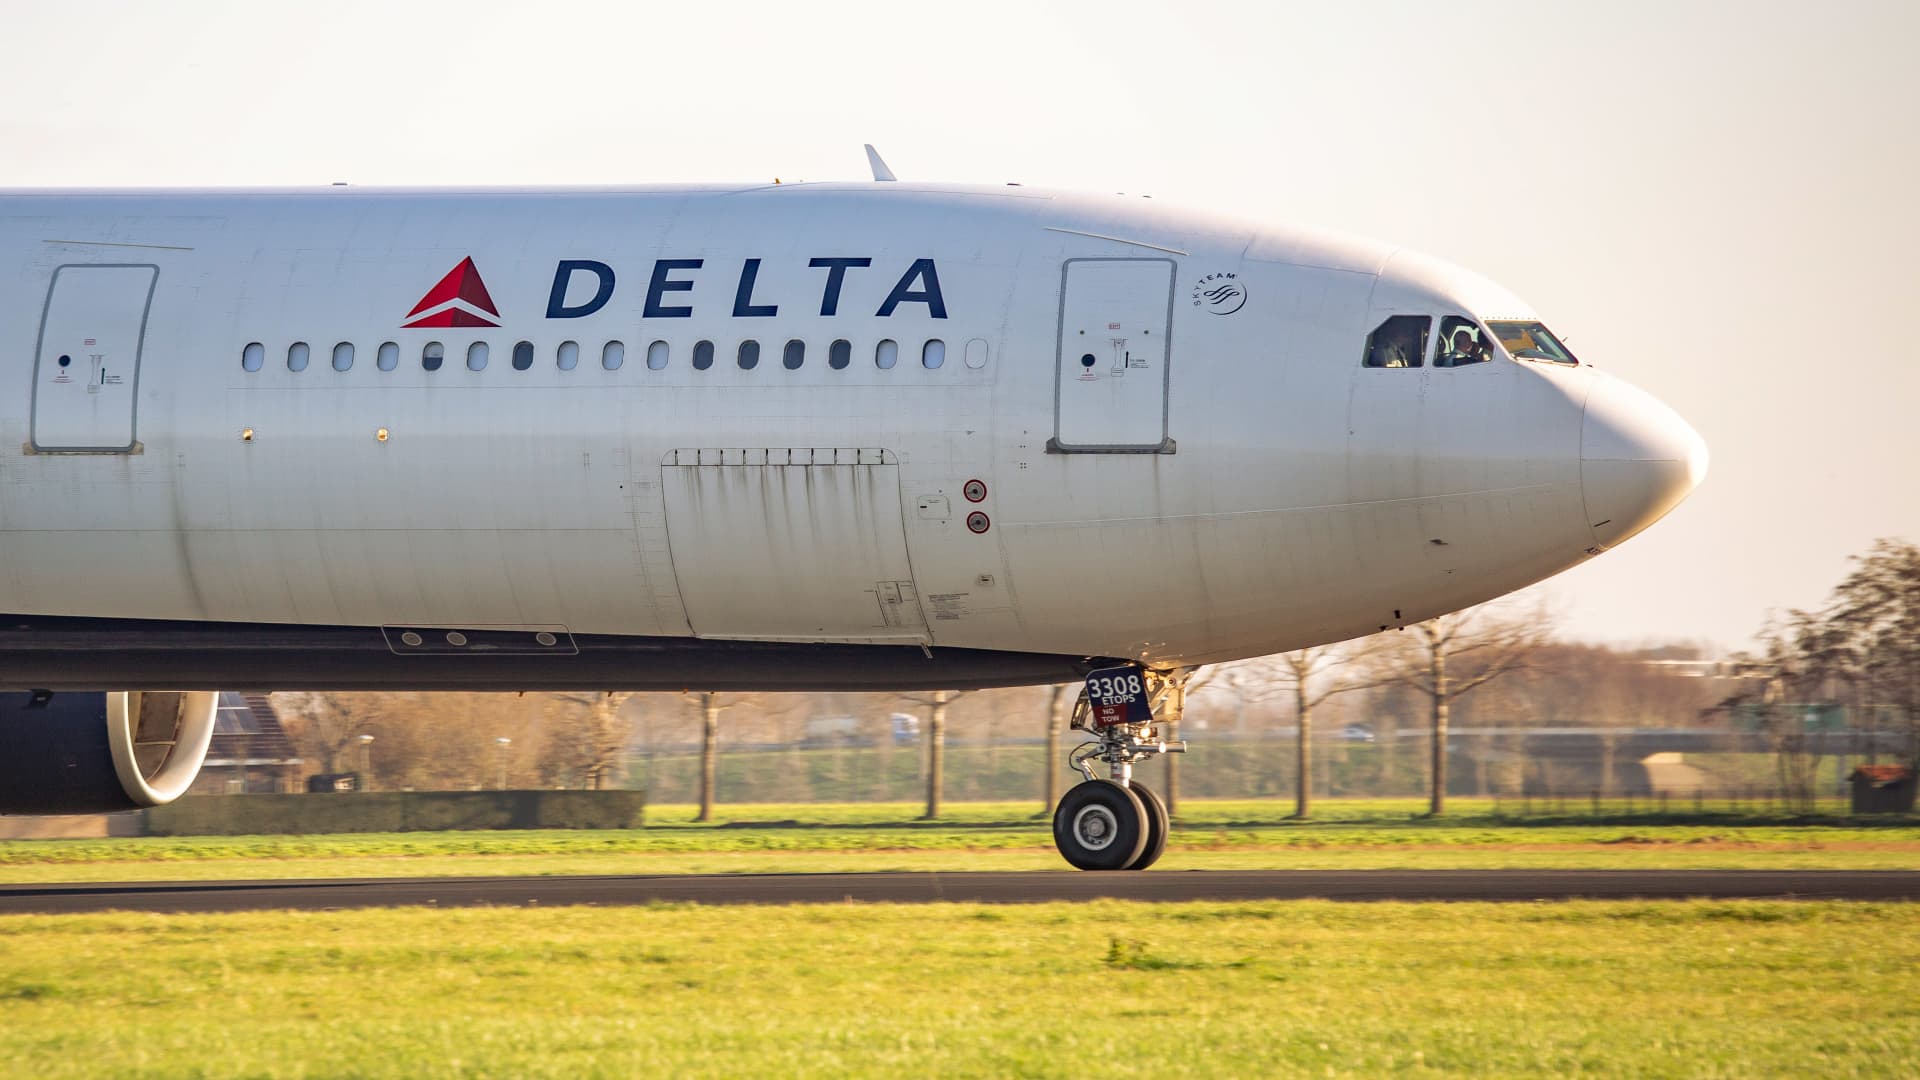 Delta passengers to Amsterdam and Rome can bypass quarantining if they test negative for Covid-19 at least three times and meet EU exemption rules.